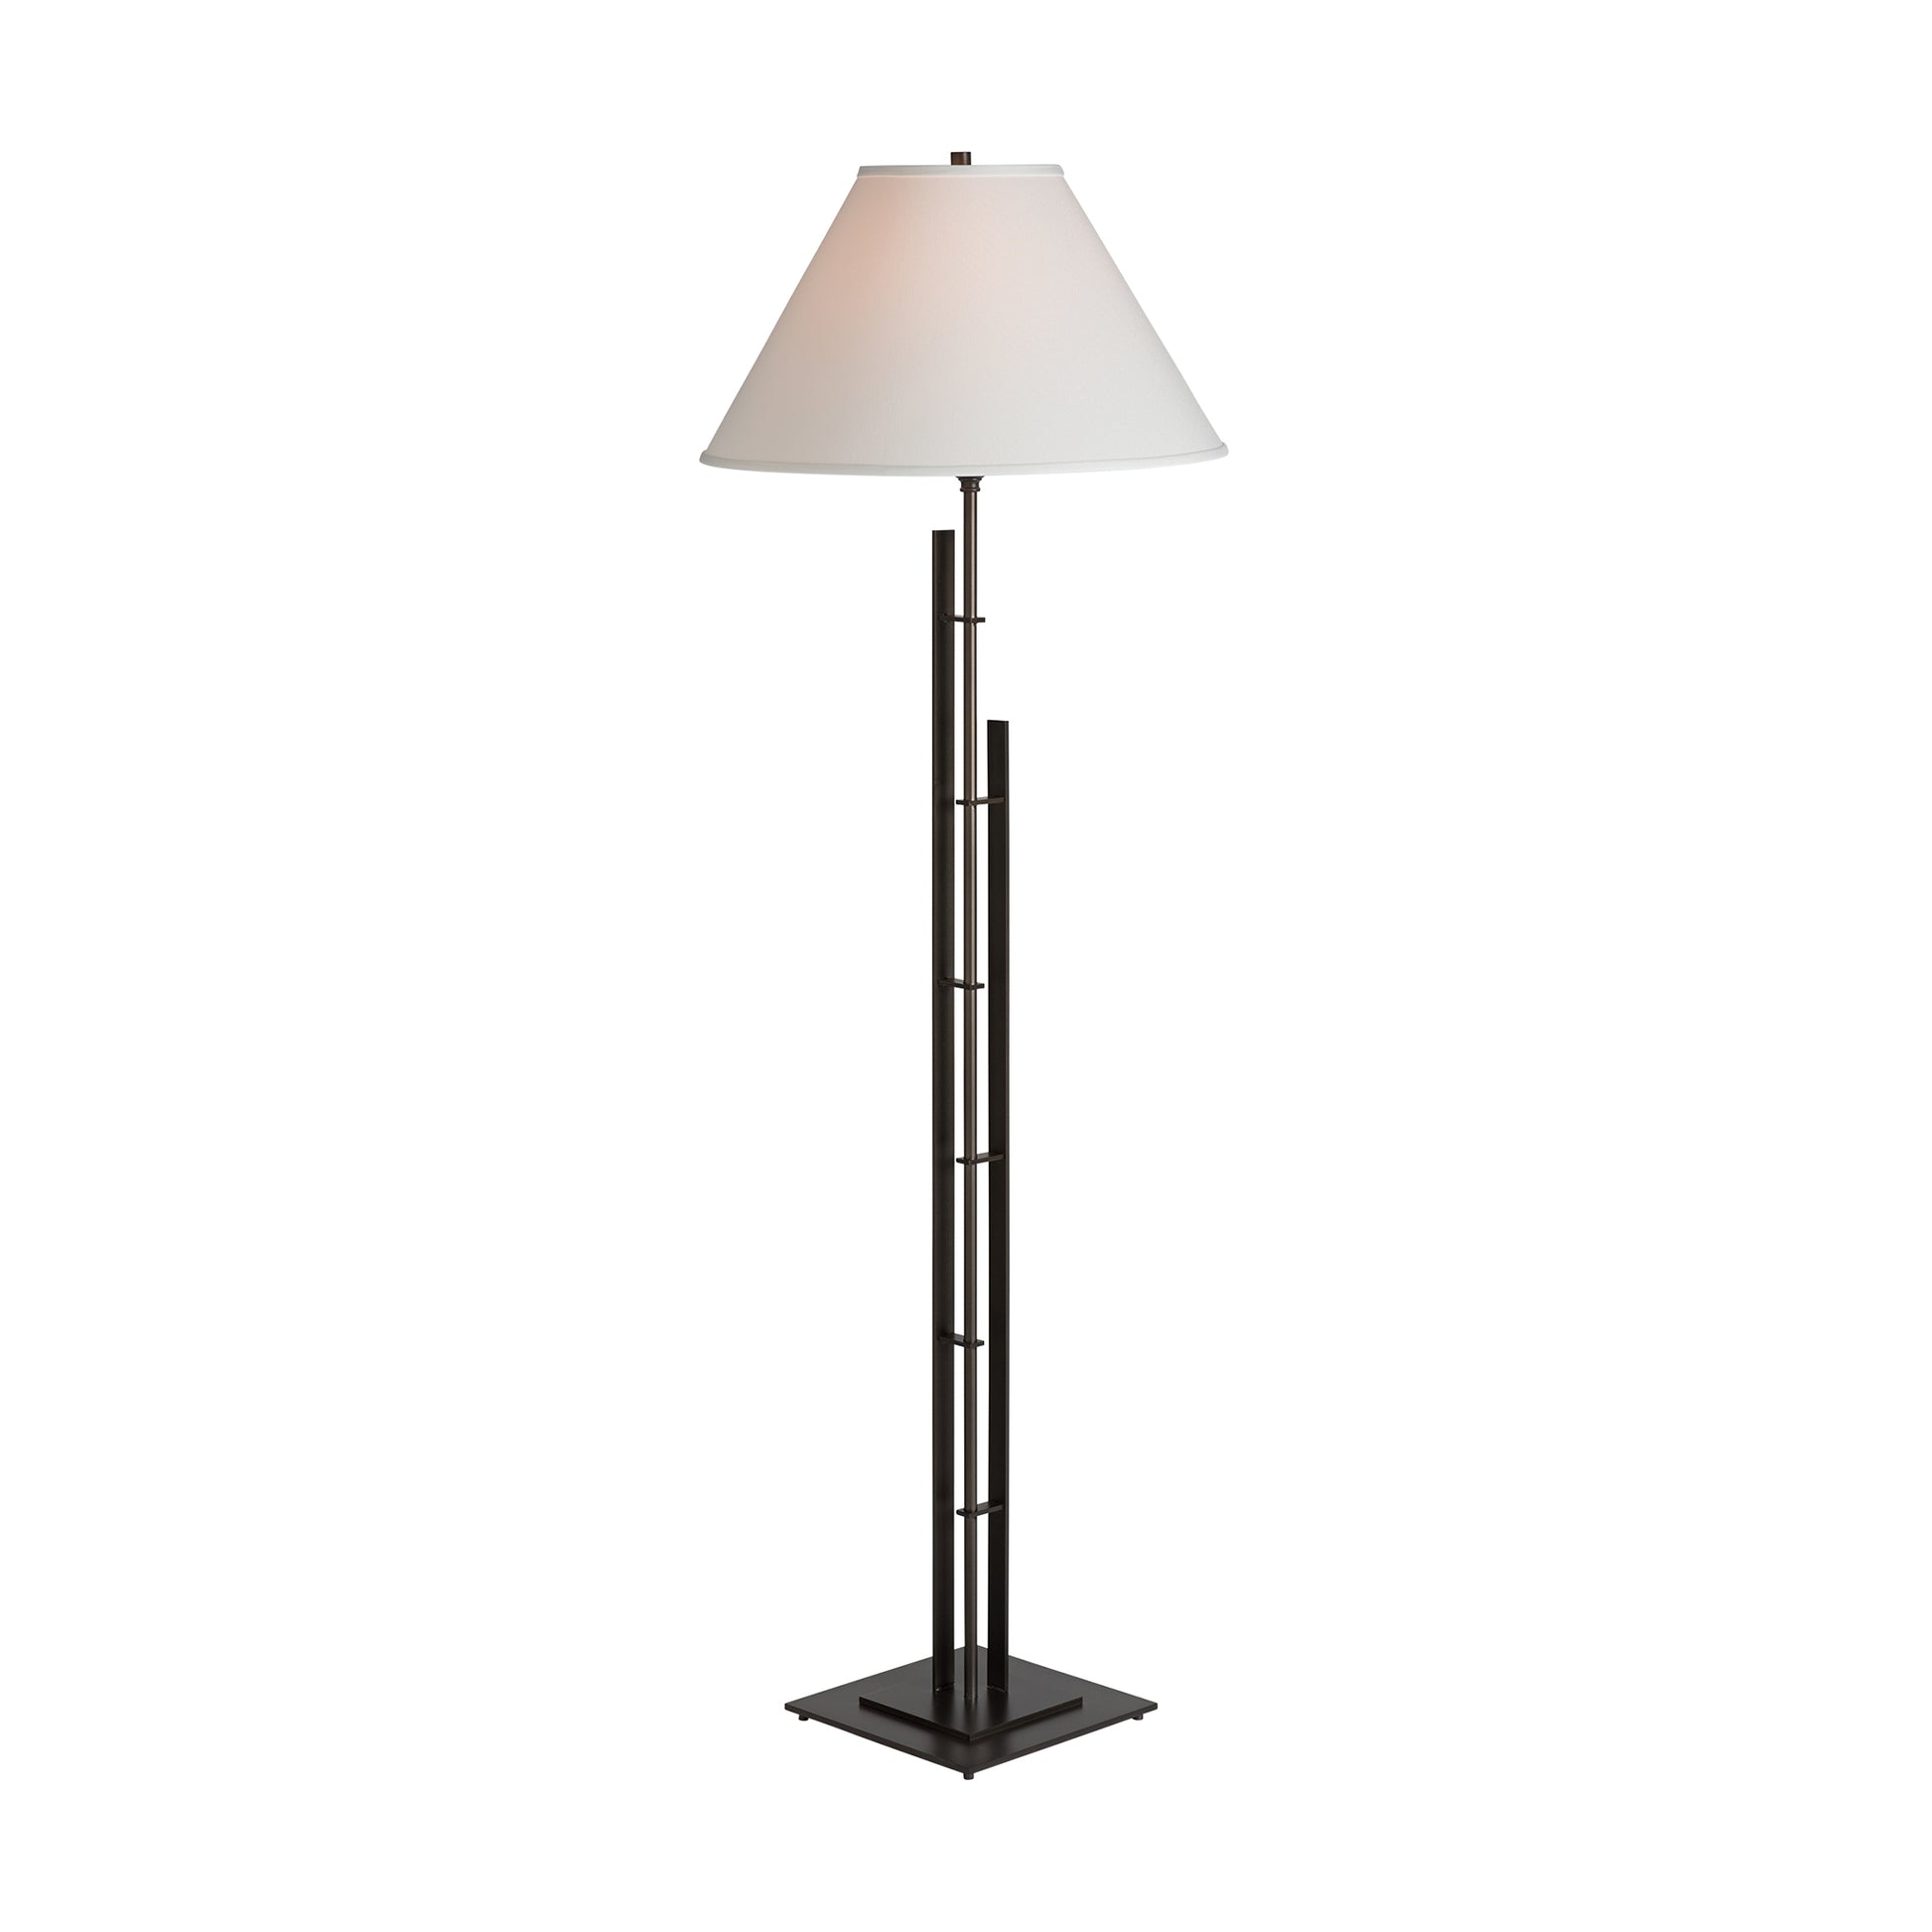 The Metra Double Floor Lamp by Hubbardton Forge showcases clean lines and features a white shade.